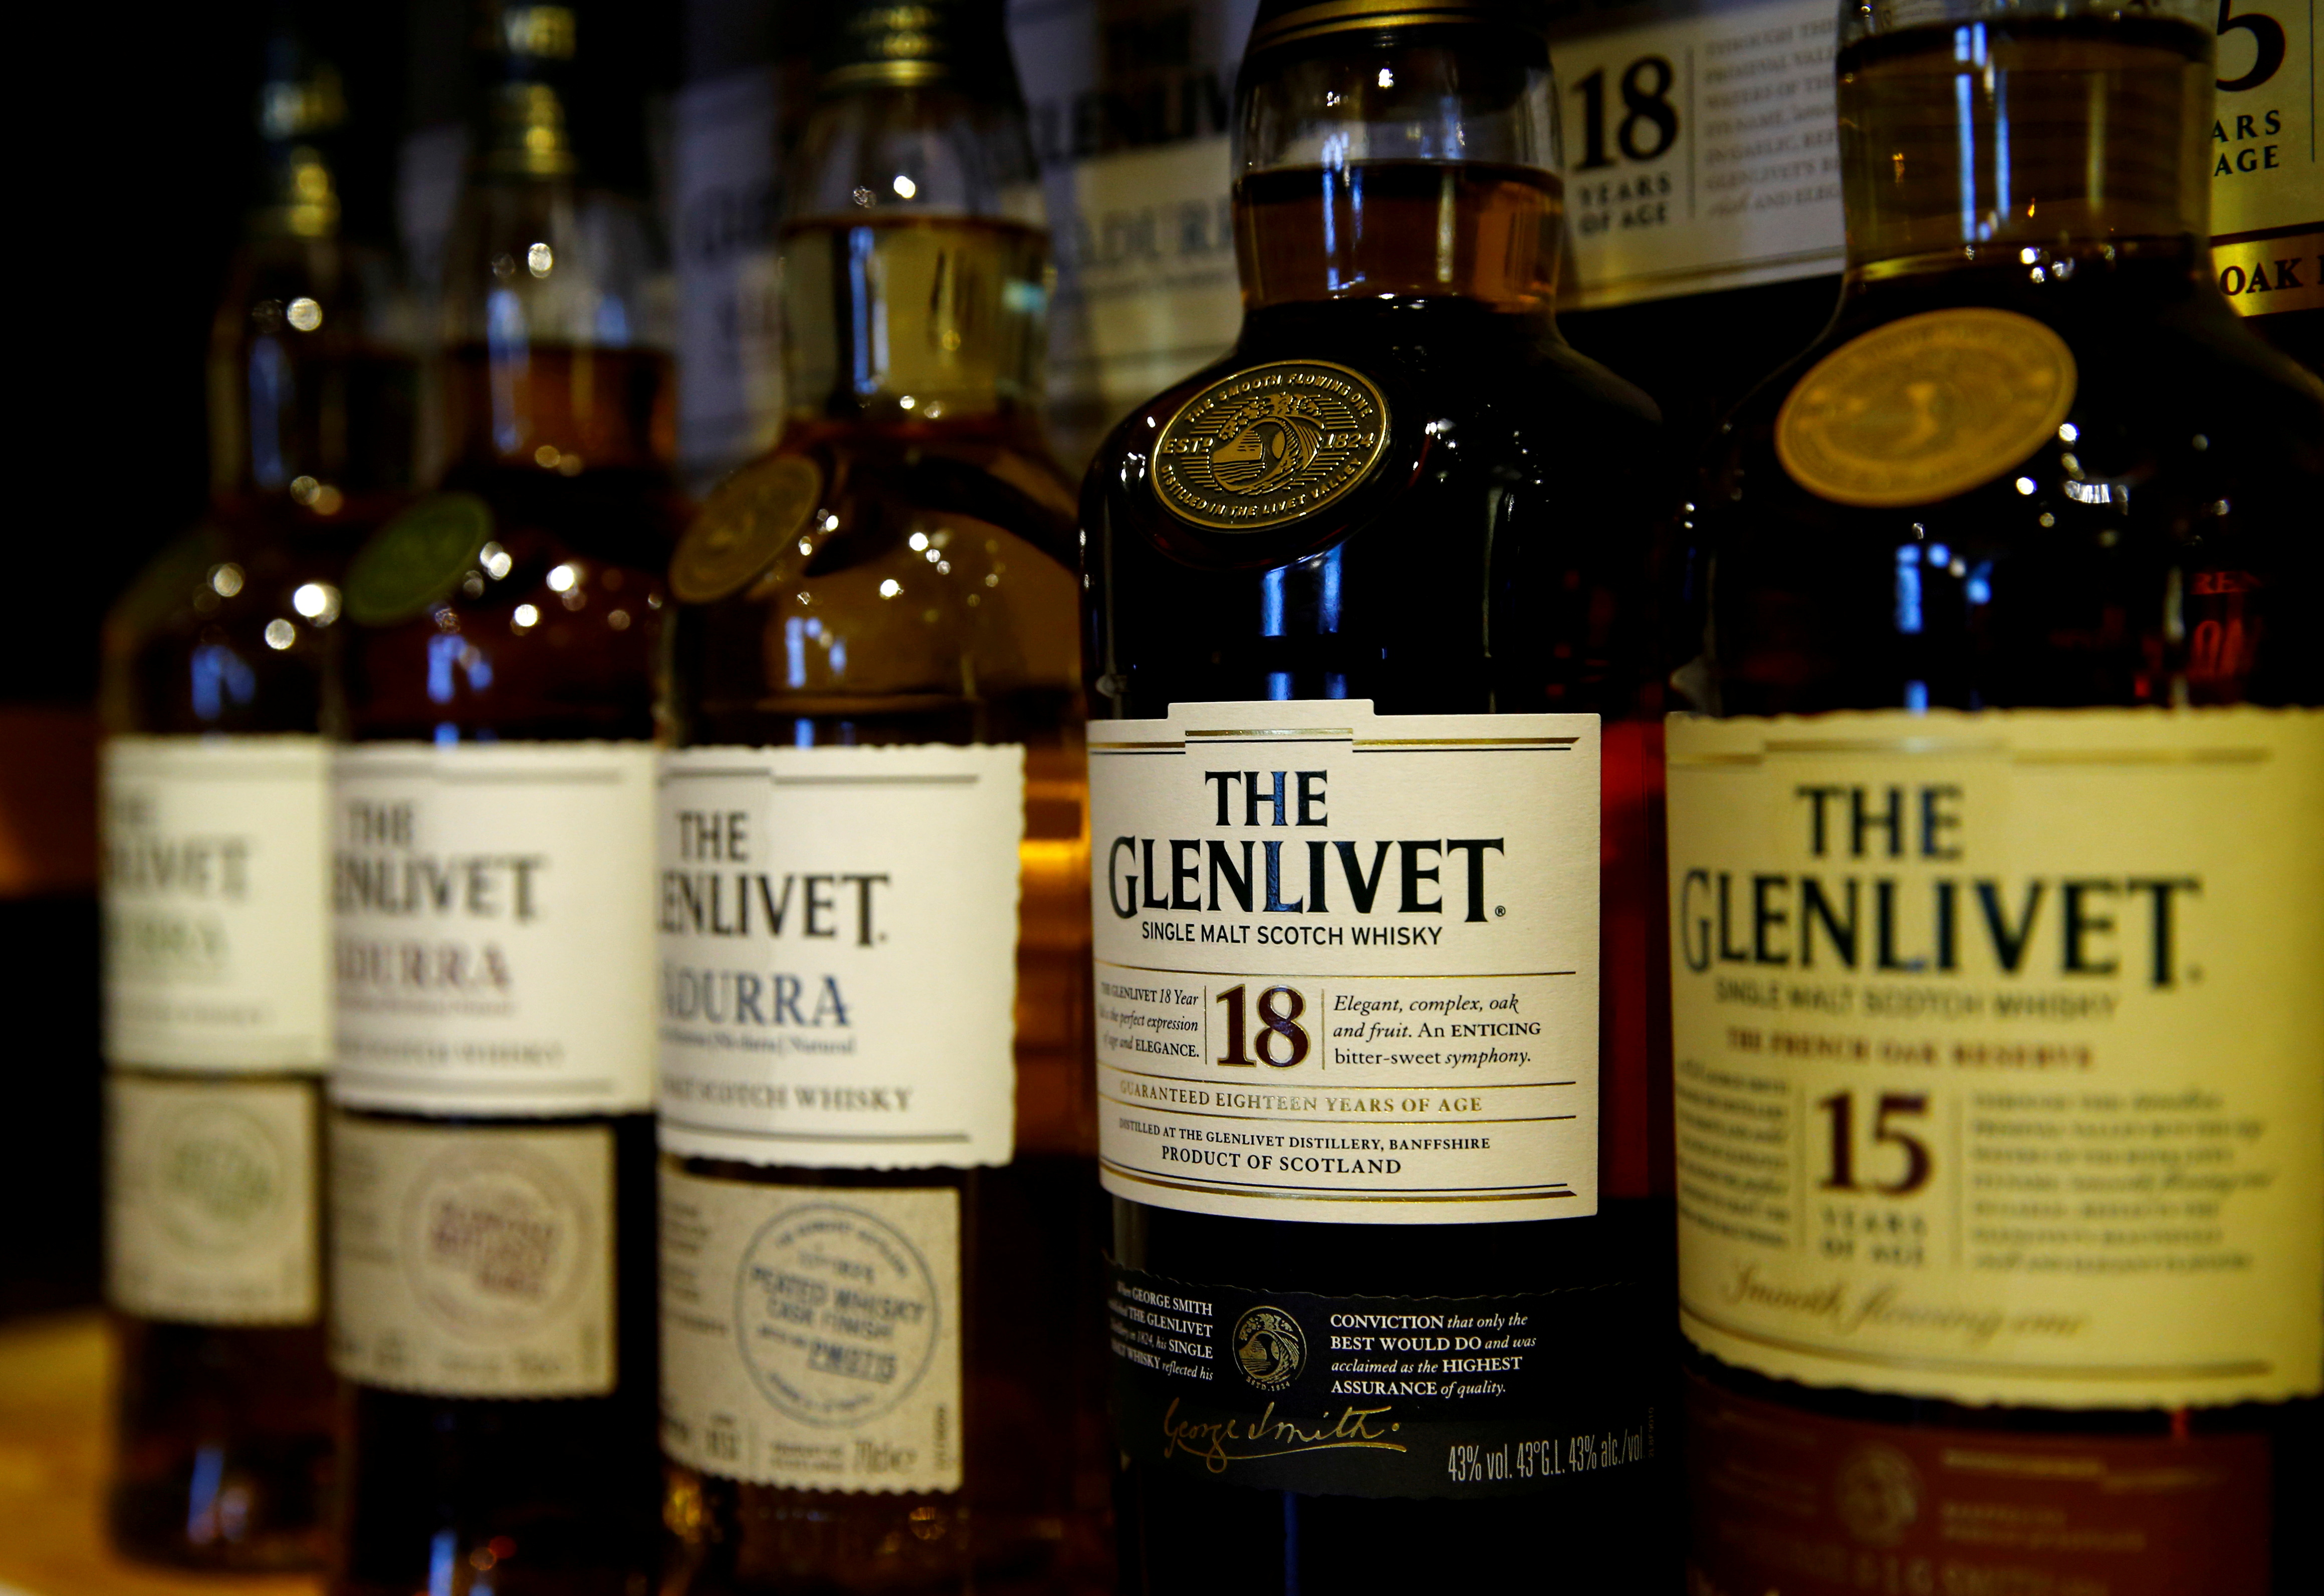 Bottles of single malt scotch whisky The Glenlivet, part of the Pernod Ricard group, are pictured in a shop near Lausanne